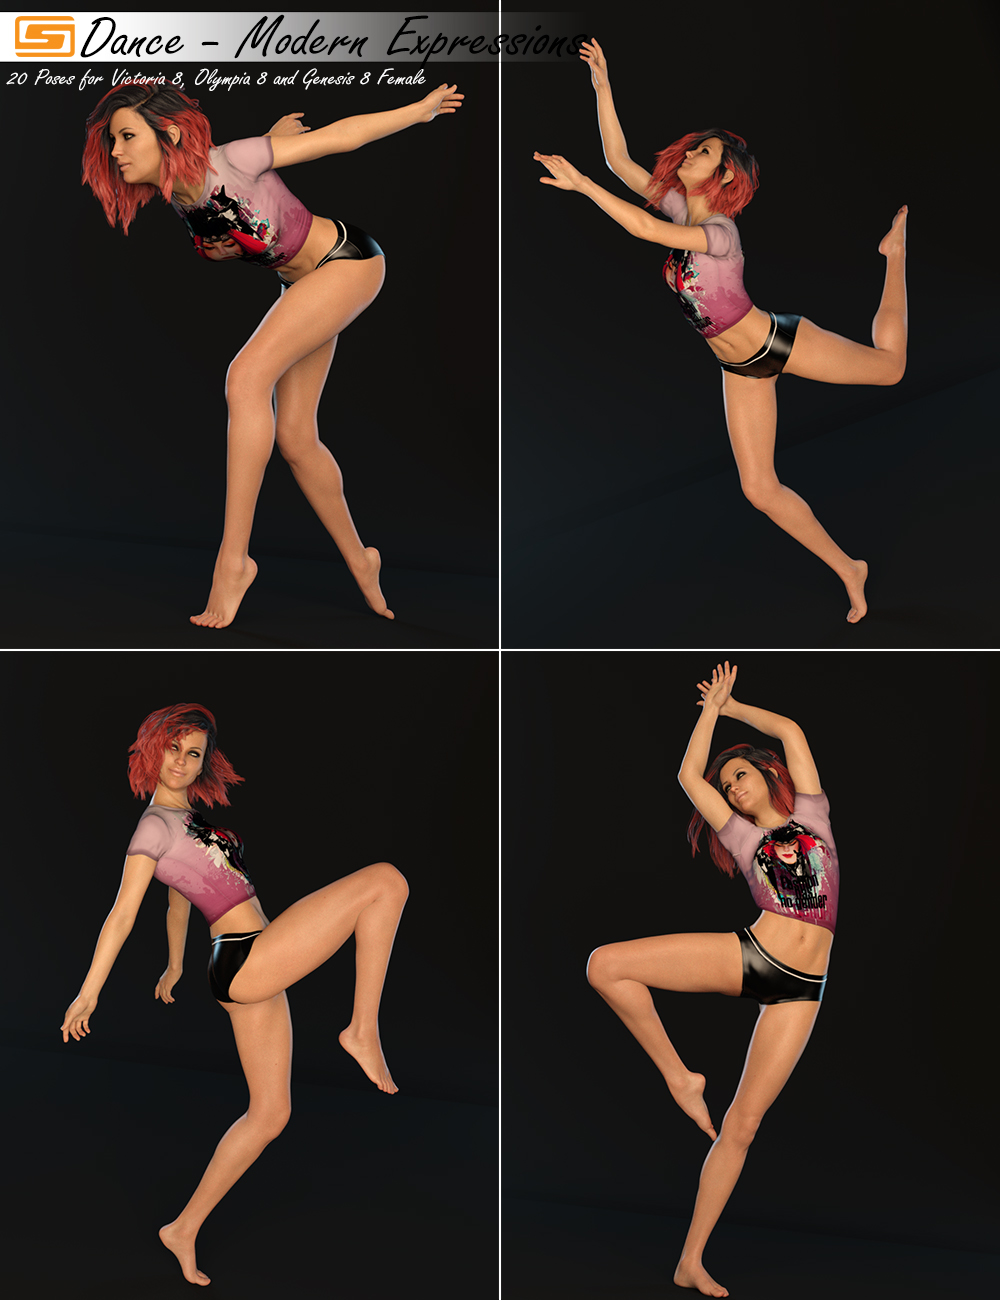 Dance - Modern Expression - Poses for Genesis 8 Female(s) by: Sedor, 3D Models by Daz 3D